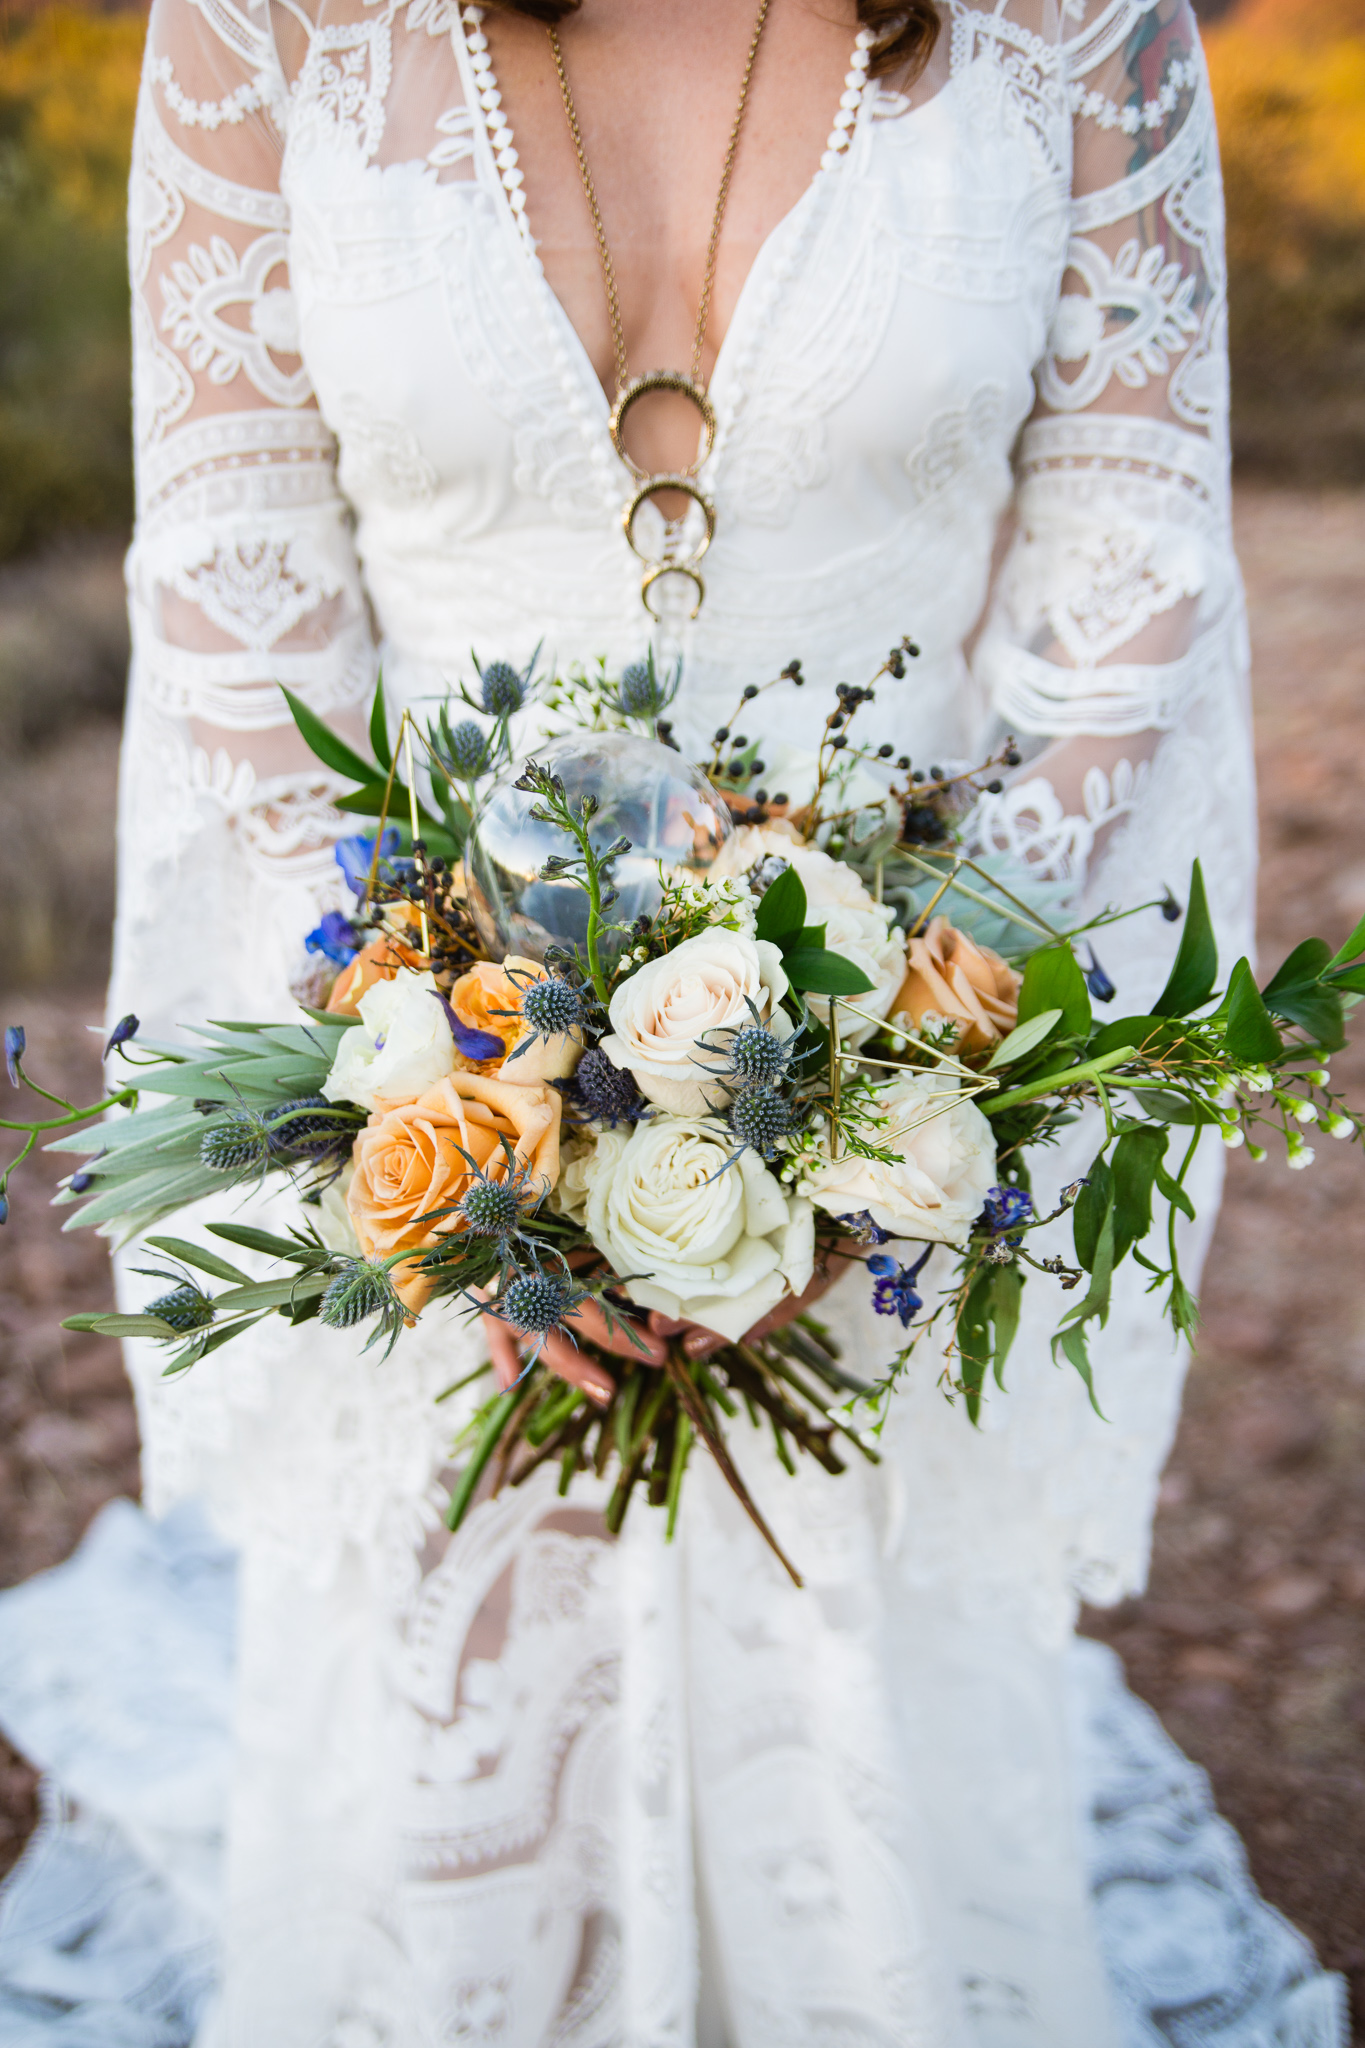 Boho witchy white blue sage and golden bouquet with gold triangles and a crystal ball by Moelleux Events at the Superstition Mountains held by bride in a bohemian rue de seine wedding dress..